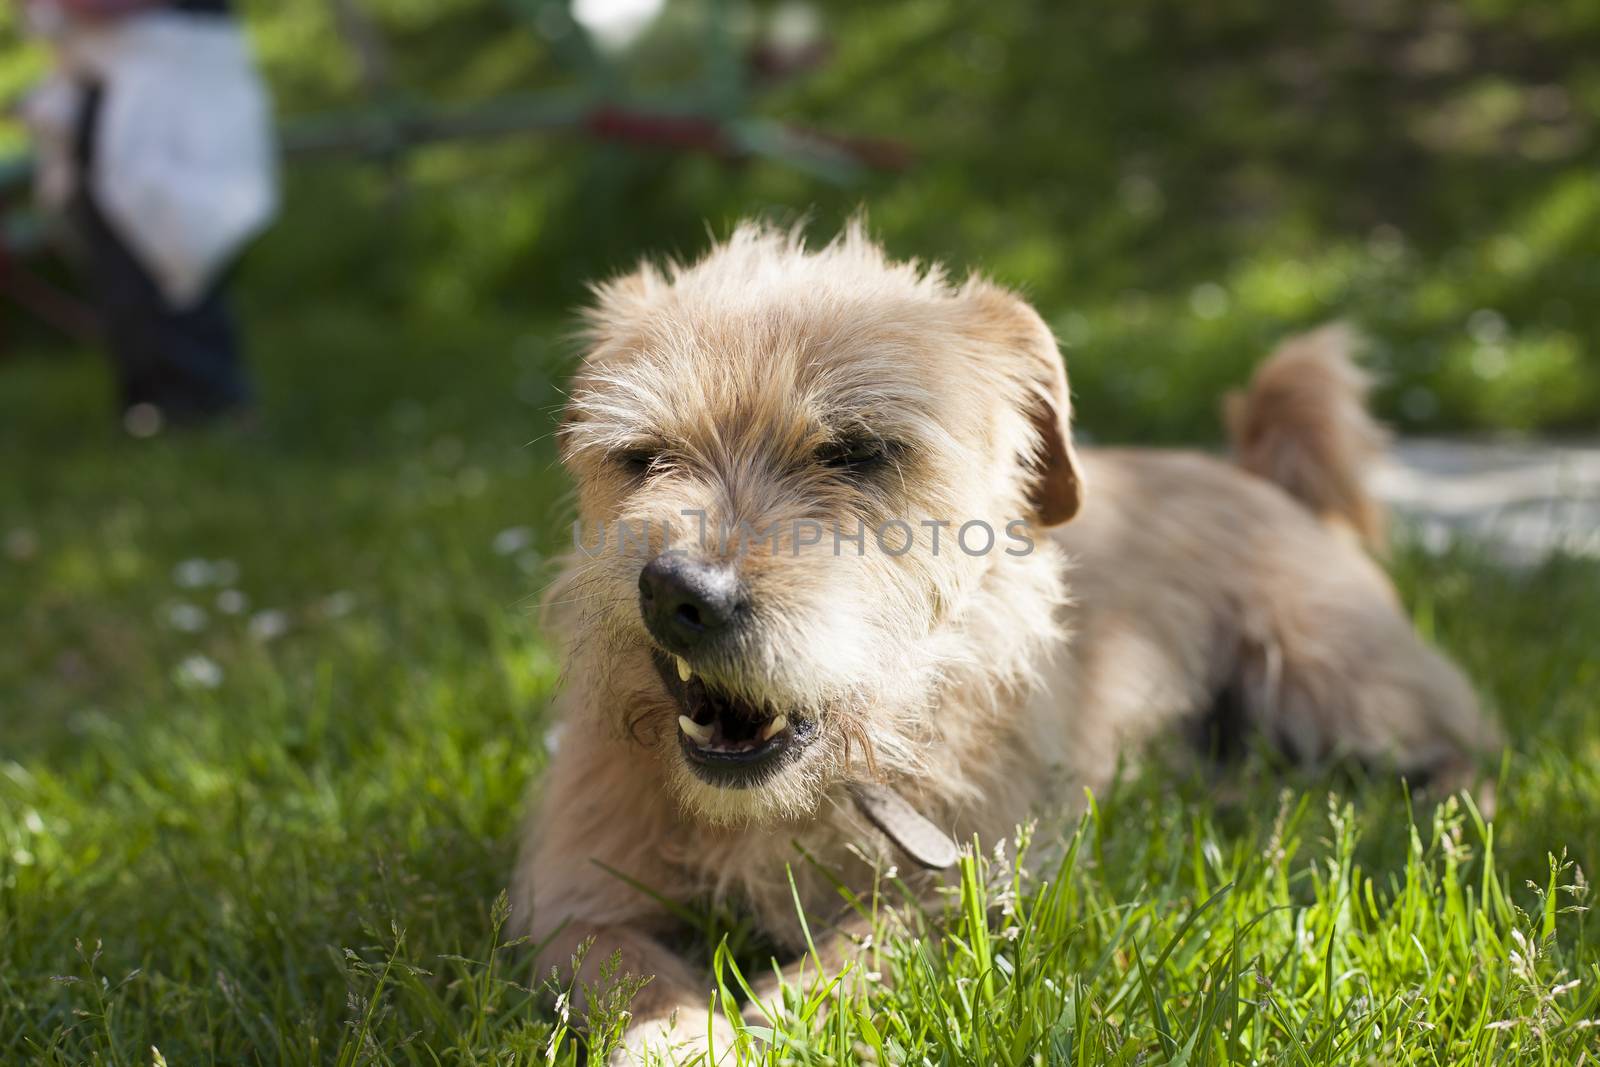 one brown terrier breed dog lying on green grass lawn showing his teeth